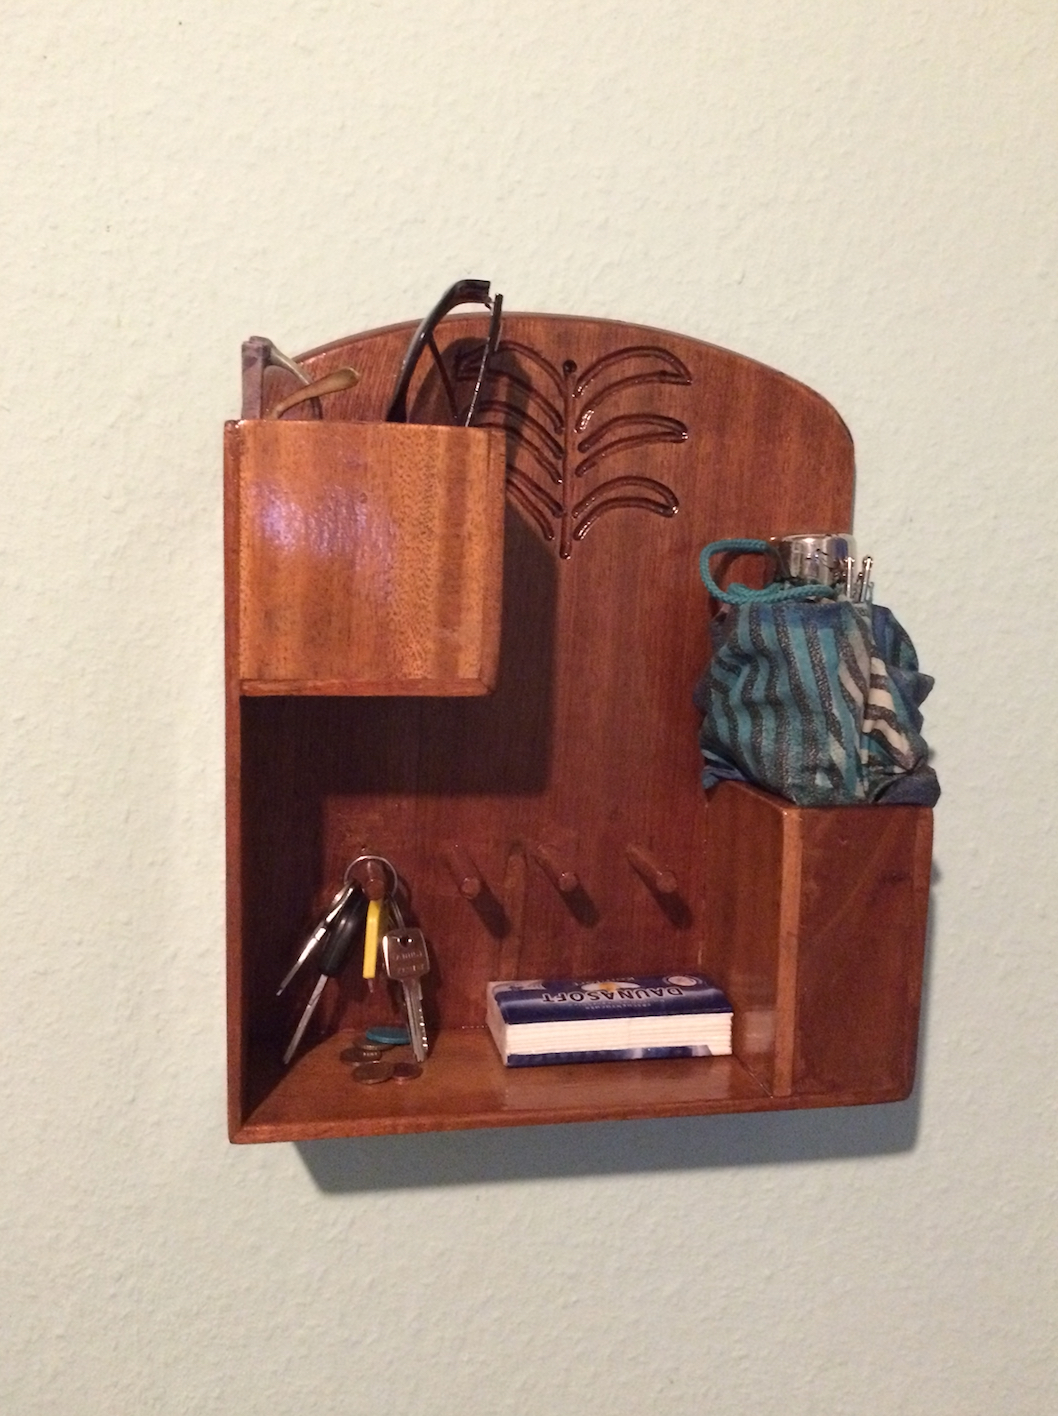 Handcrafted Personalized Key Racks - Unique Storage Solutions